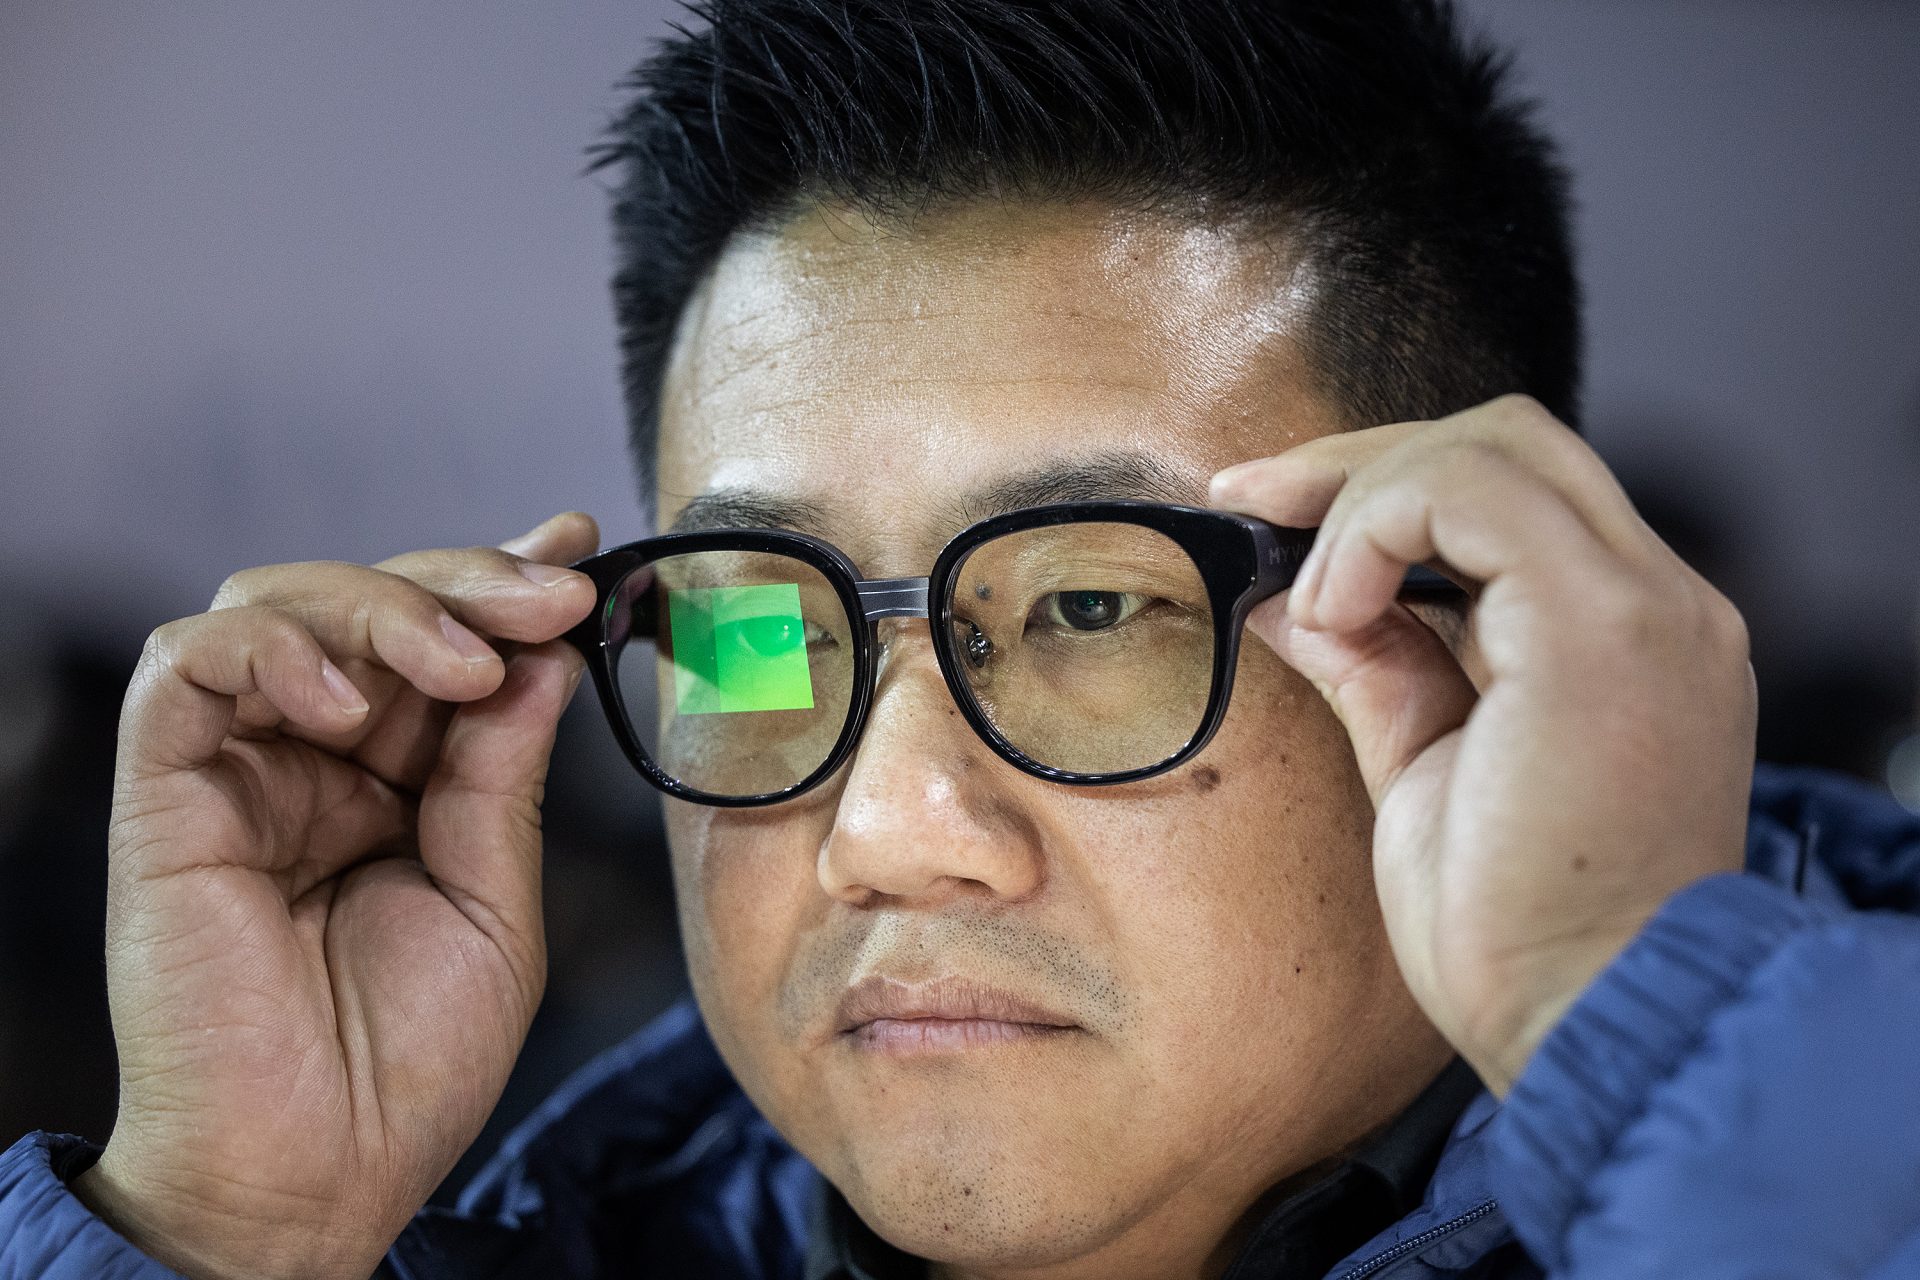 Smart glasses: what are they?